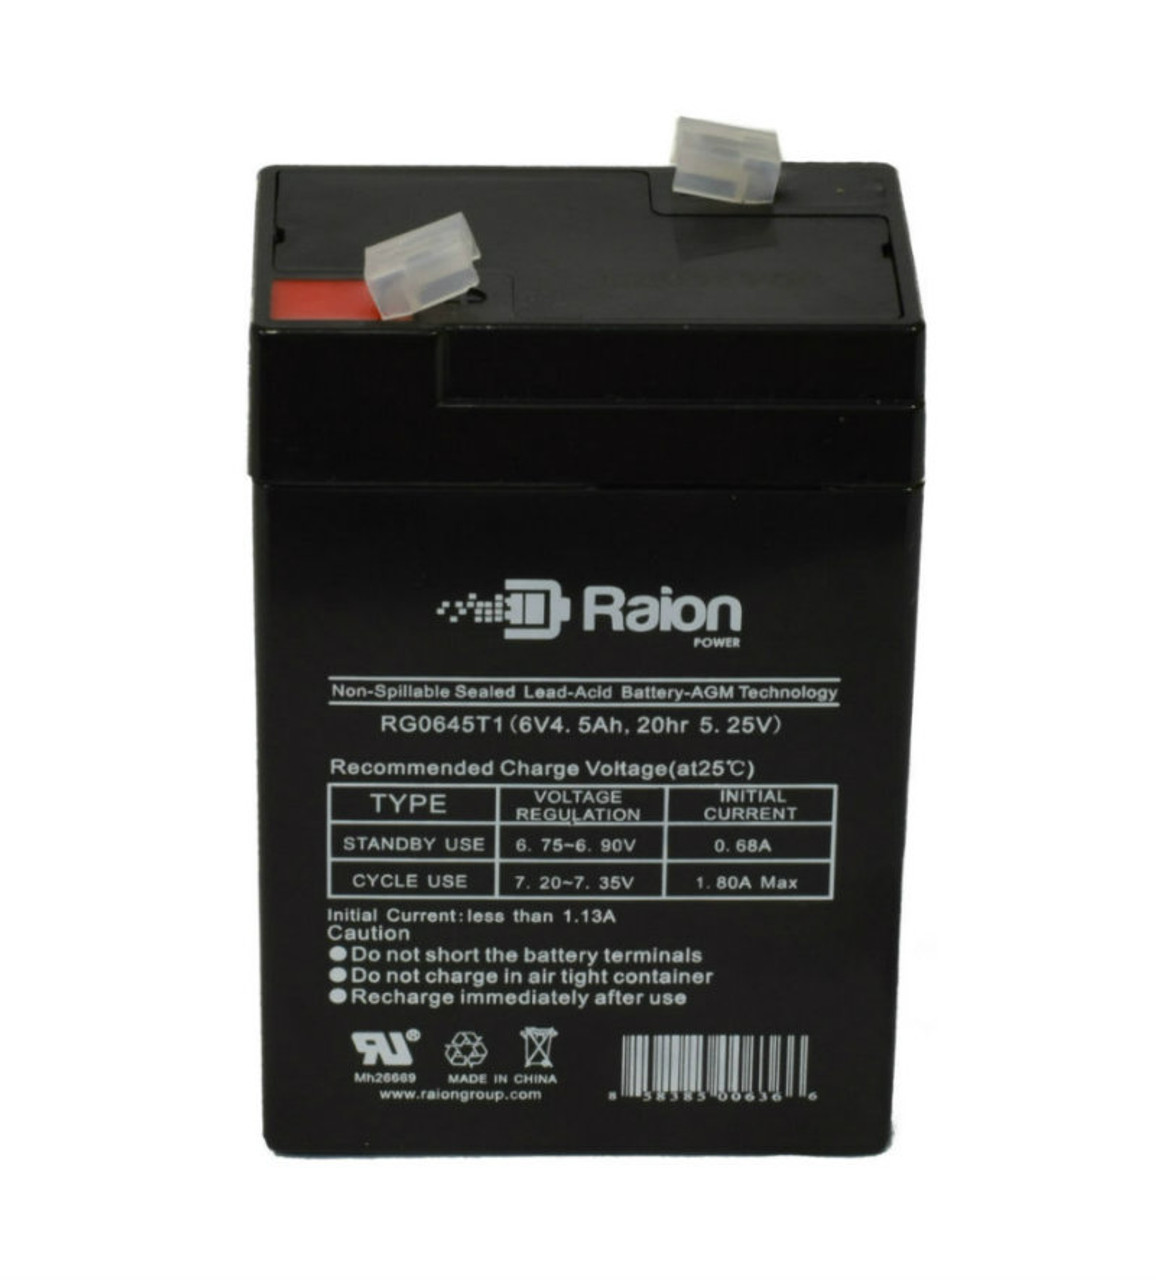 Raion Power RG0645T1 Replacement Battery Cartridge for NPP Power NP6-4.2Ah